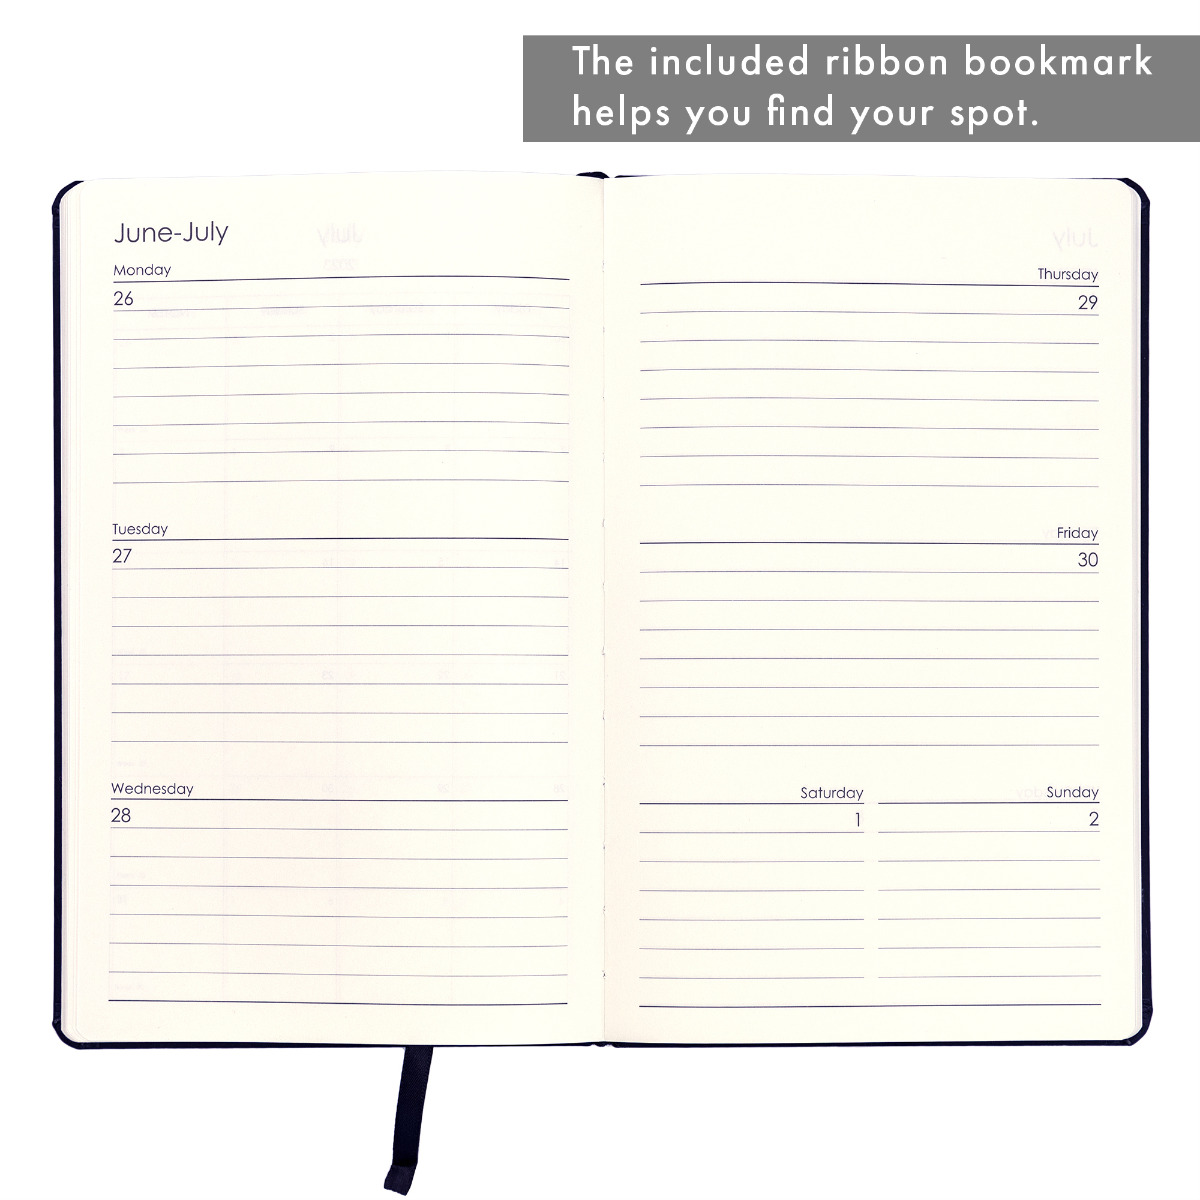 A5 Planners From The Carpe Diem Planners Range - Pukka Pads